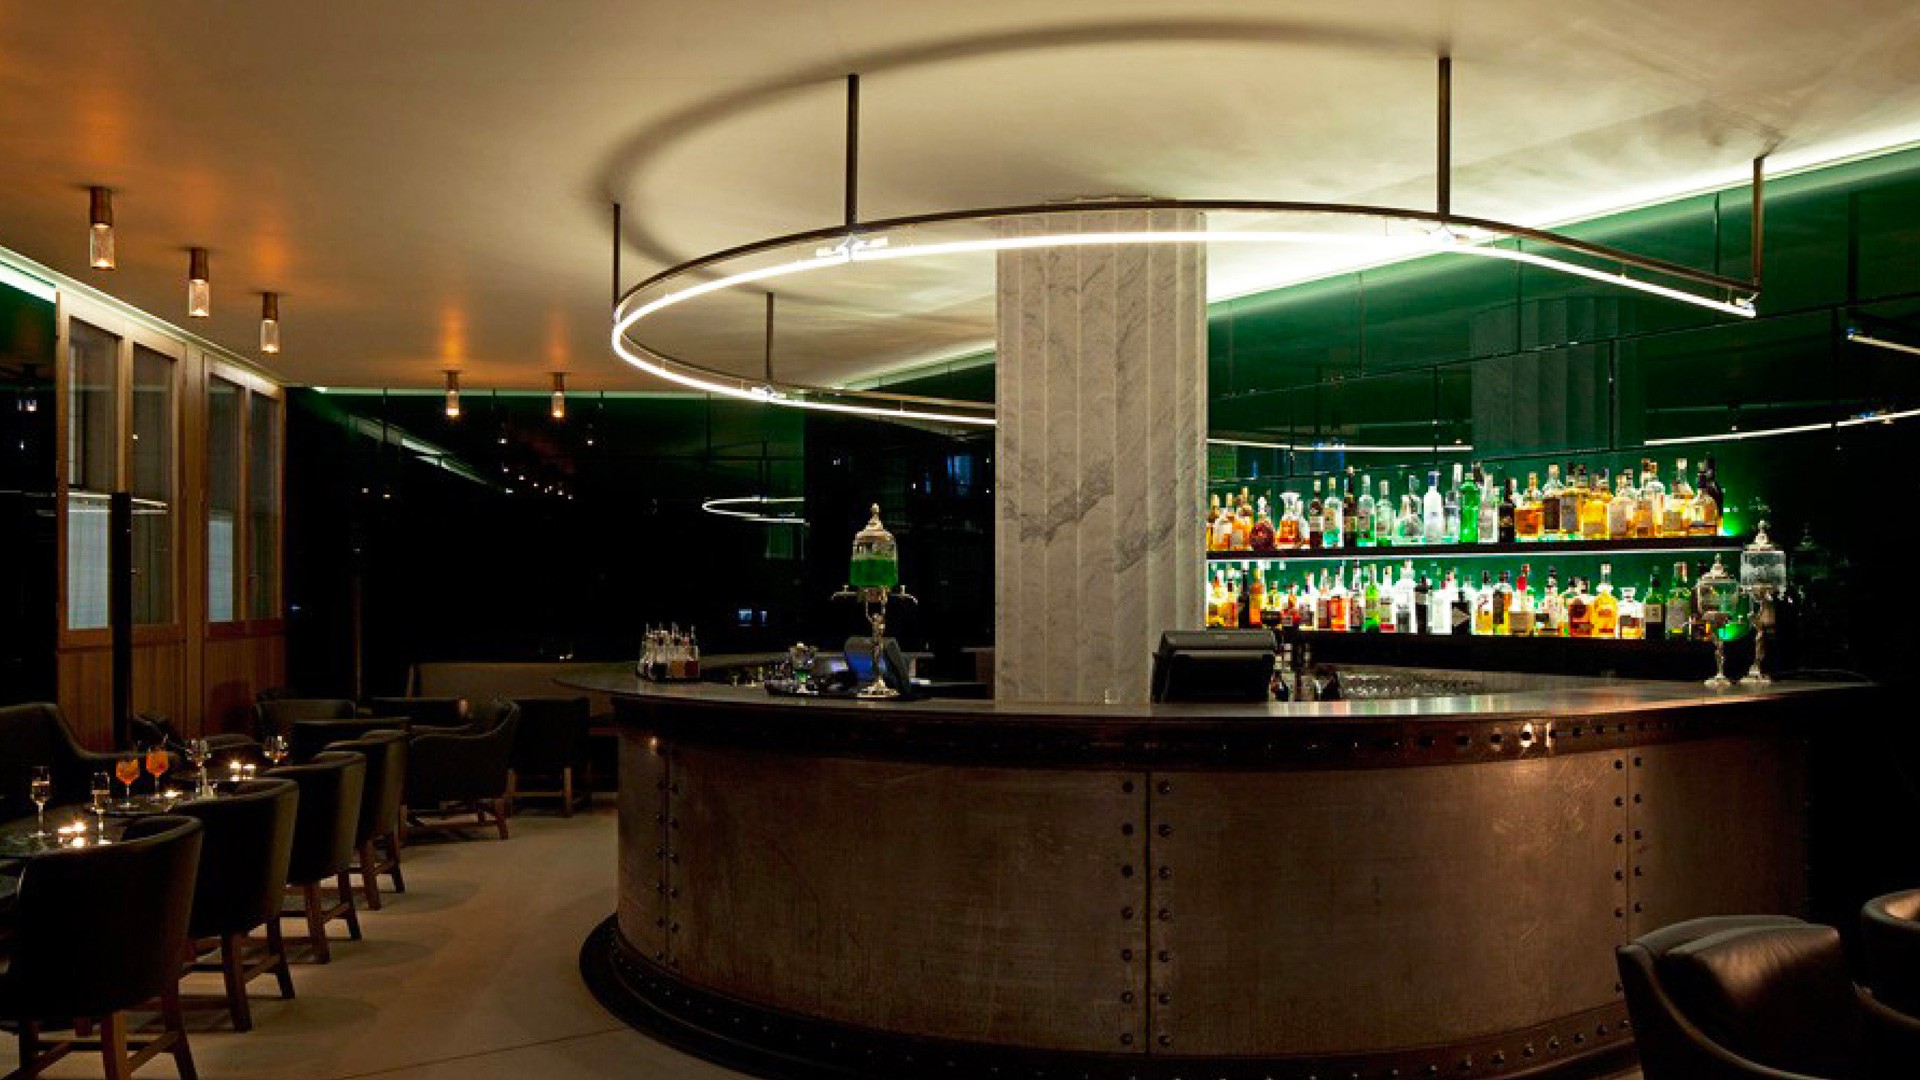 Poliform_contract_hospitality_HOTEL_CAFE_ROYAL_04_1920x1080px_gallery